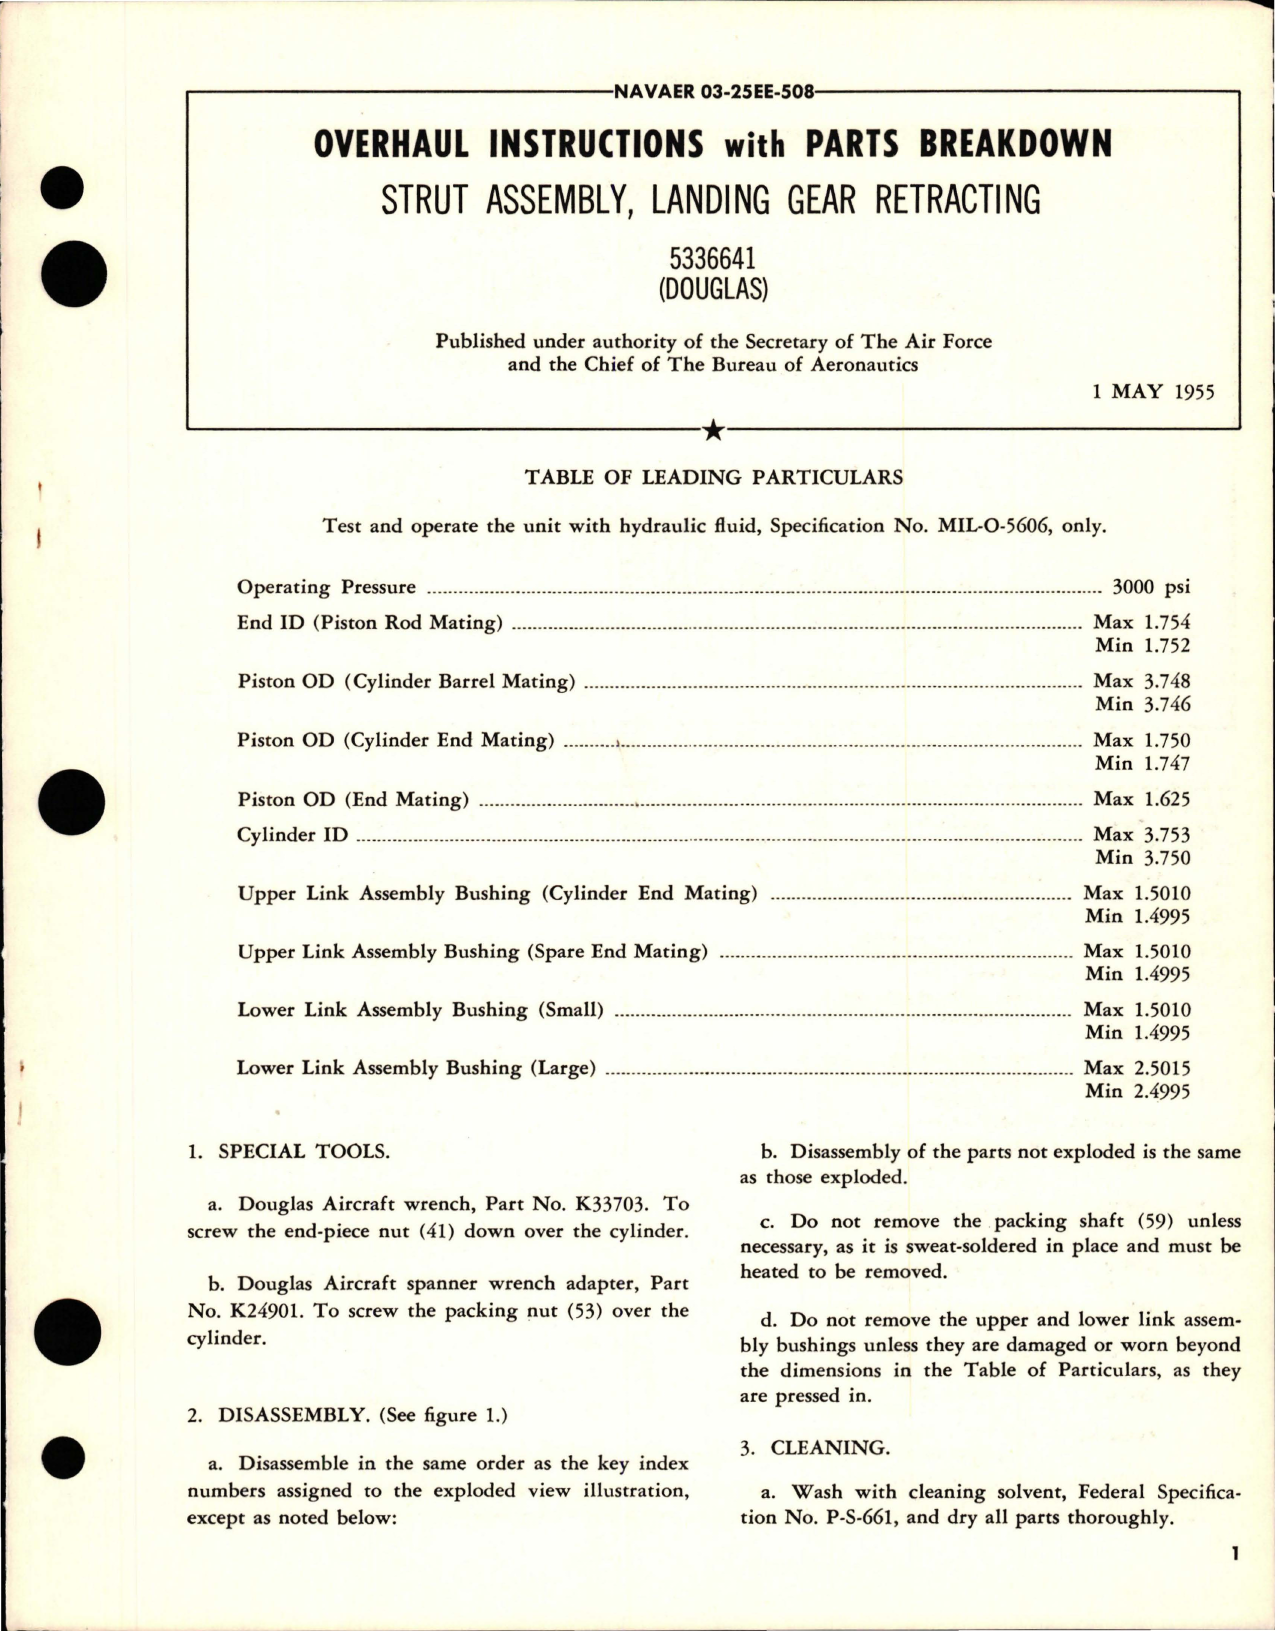 Sample page 1 from AirCorps Library document: Overhaul Instructions with Parts Breakdown for Landing Gear Retracting Strut Assembly - 5336641